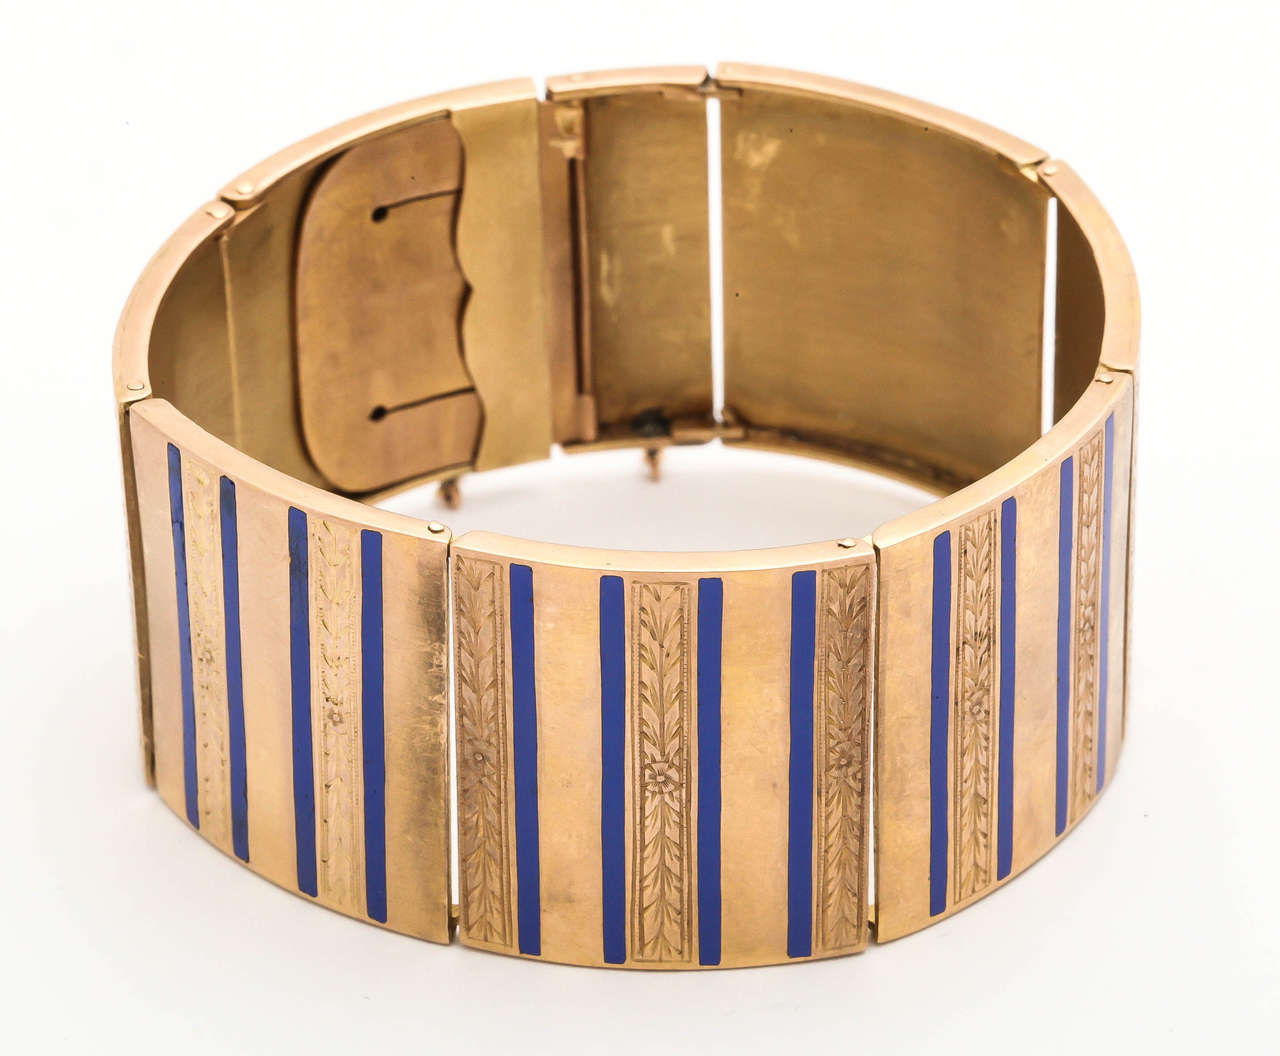 18kt gold and alternating floral hand engraved and solid polished strip panels designed with alternating periwinkle blue enamel stripes flexible bangle bracelet designed with hinges thruout bracelet for extra flexibility. Beautifully made with an